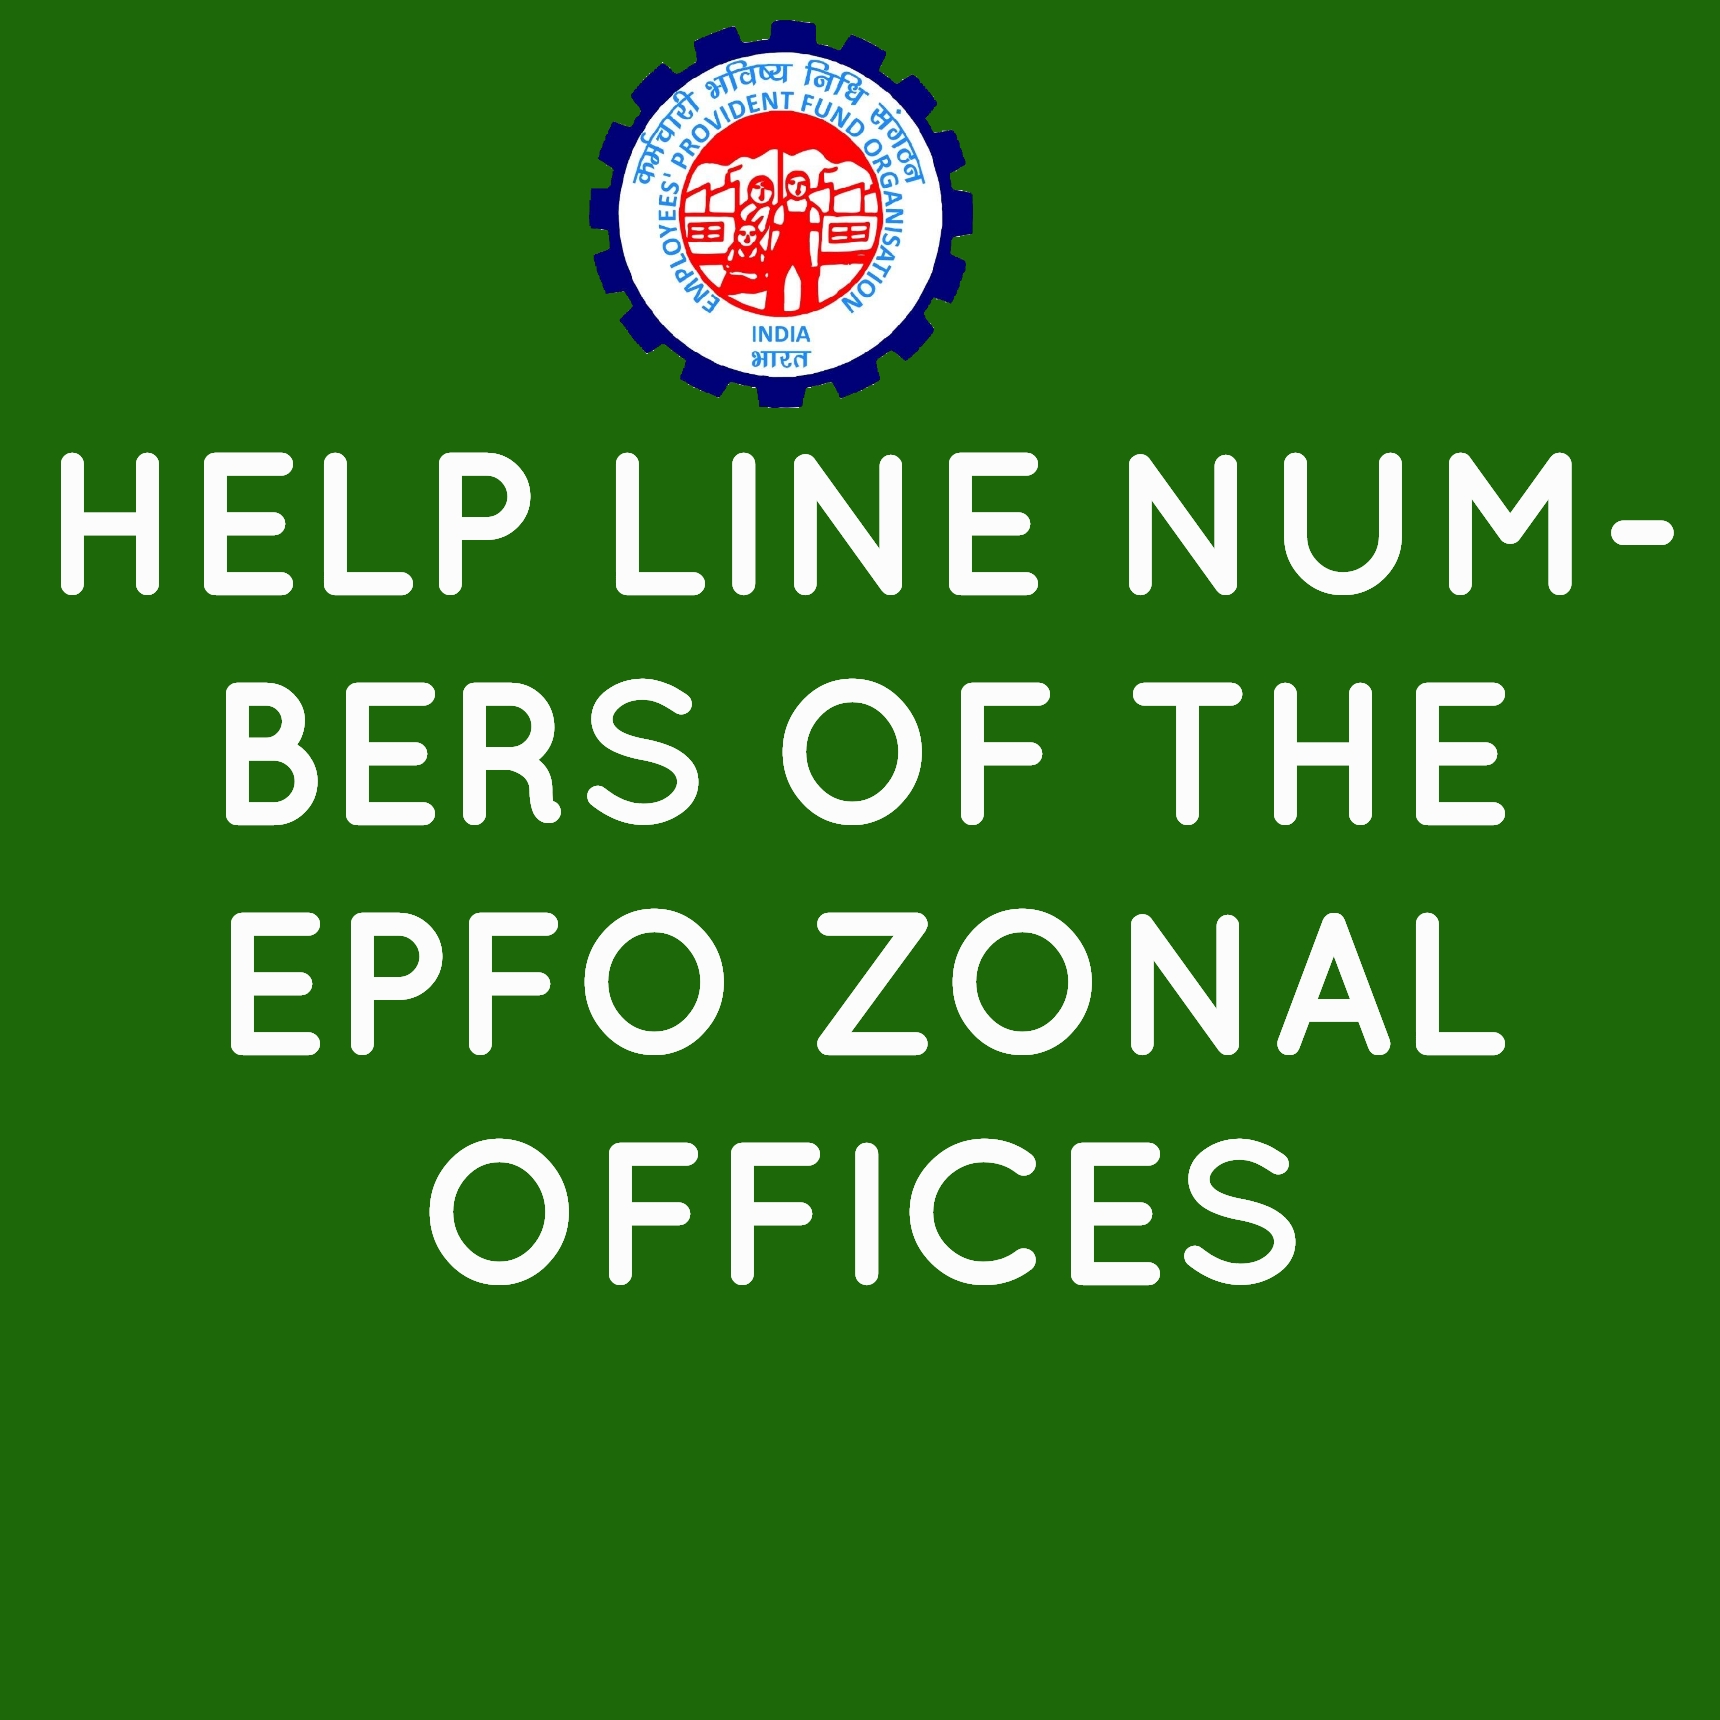 HELP LINE NUMBERS OF THE EPFO ZONAL OFFICES